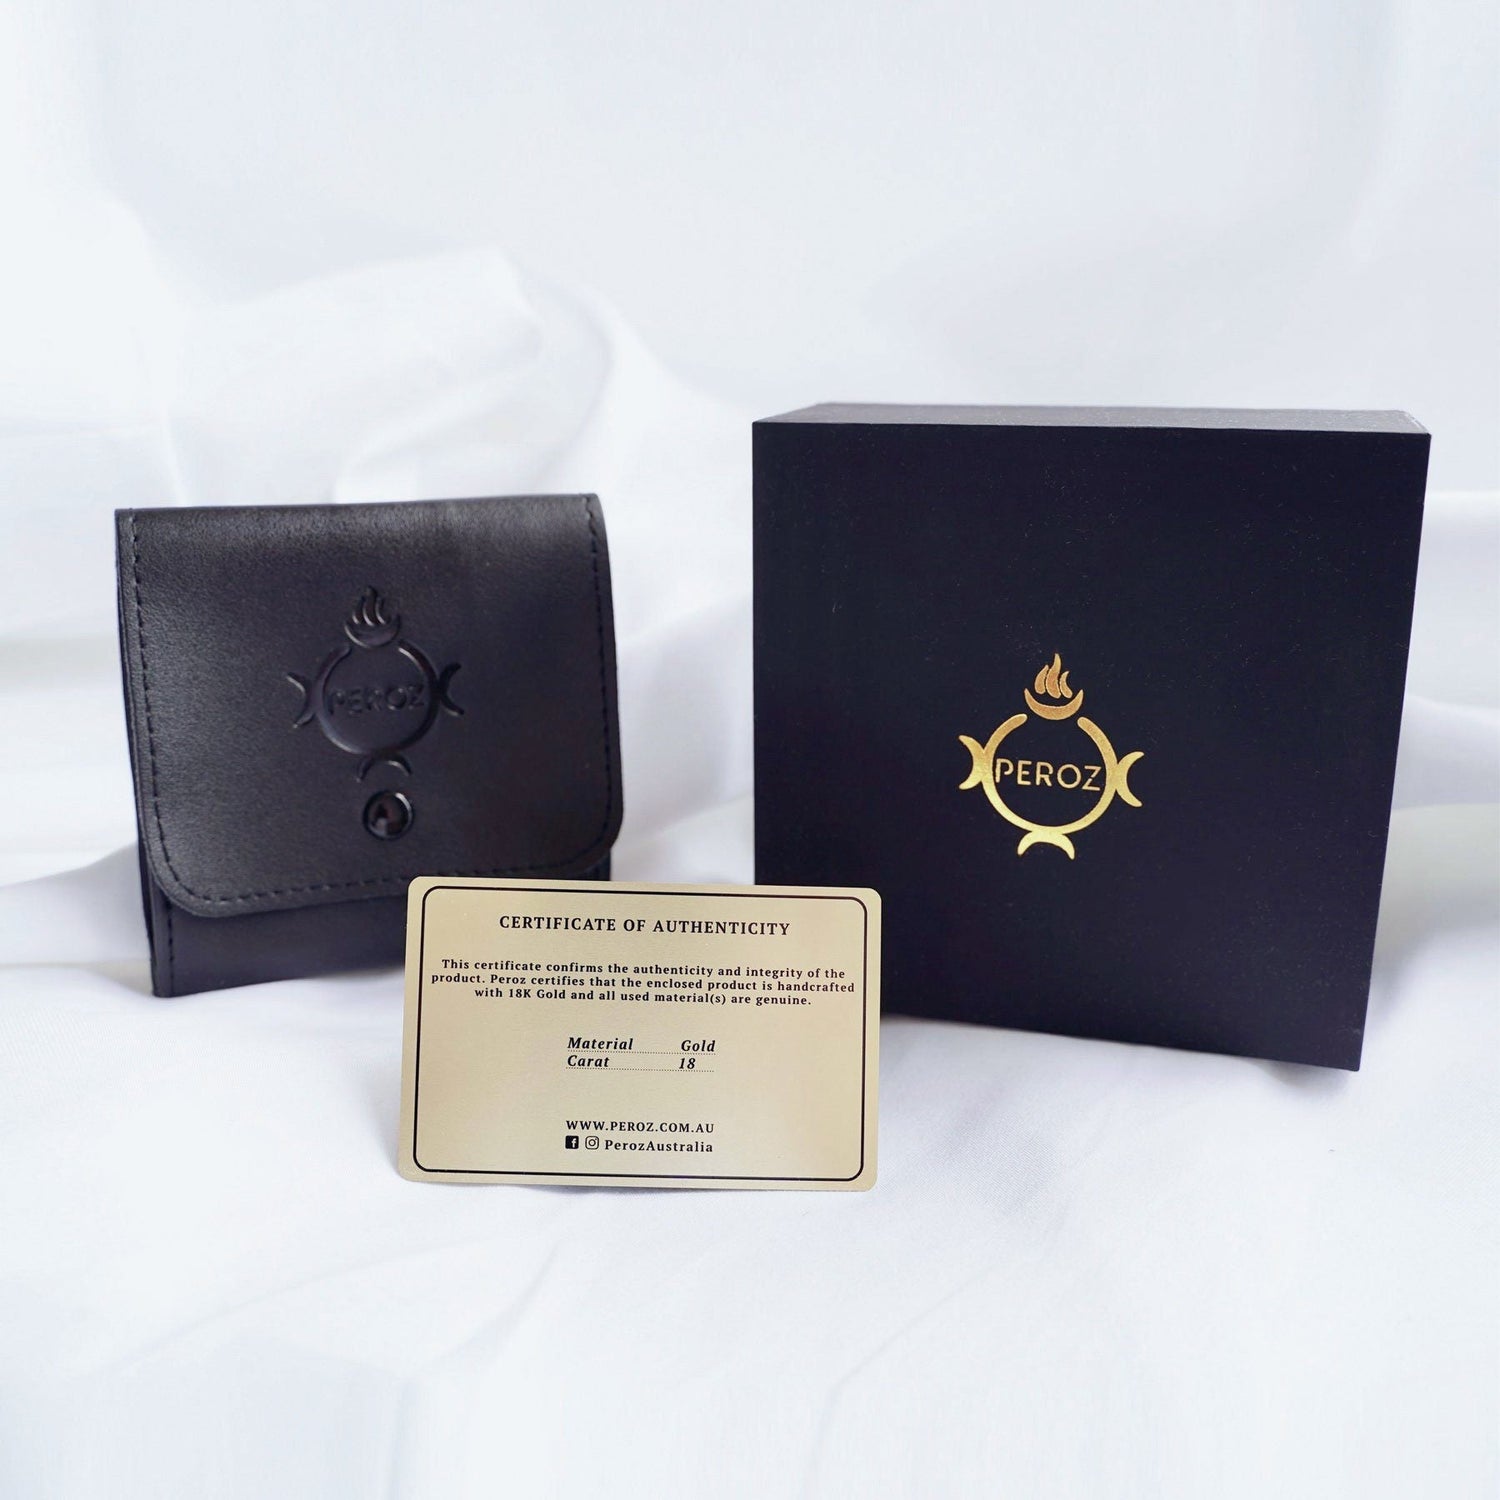 Peroz Leather accessories packaging